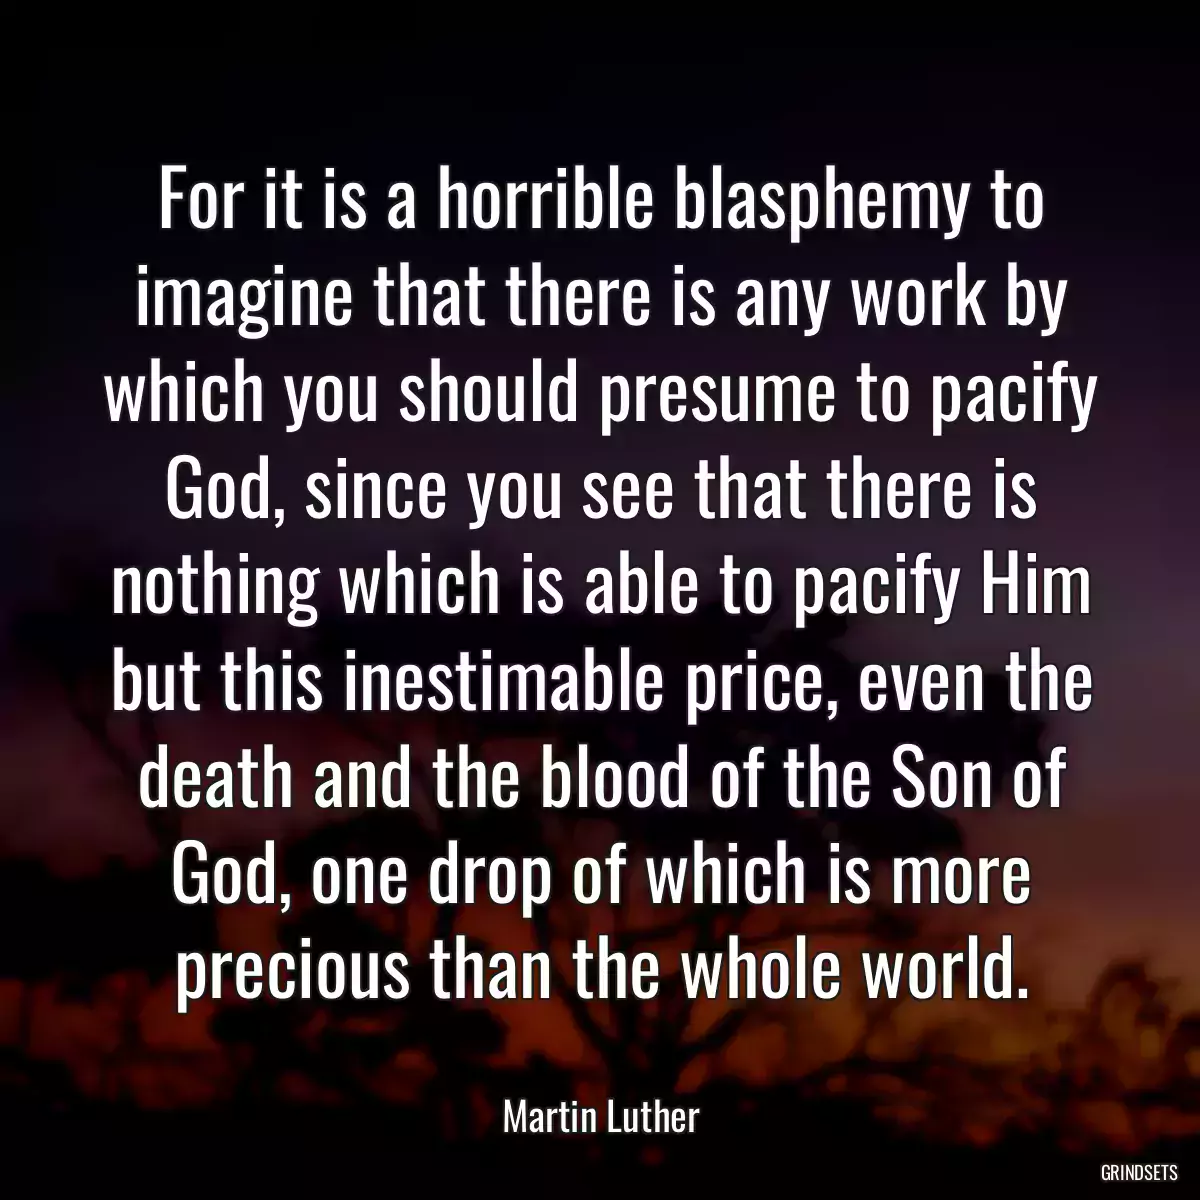 For it is a horrible blasphemy to imagine that there is any work by which you should presume to pacify God, since you see that there is nothing which is able to pacify Him but this inestimable price, even the death and the blood of the Son of God, one drop of which is more precious than the whole world.